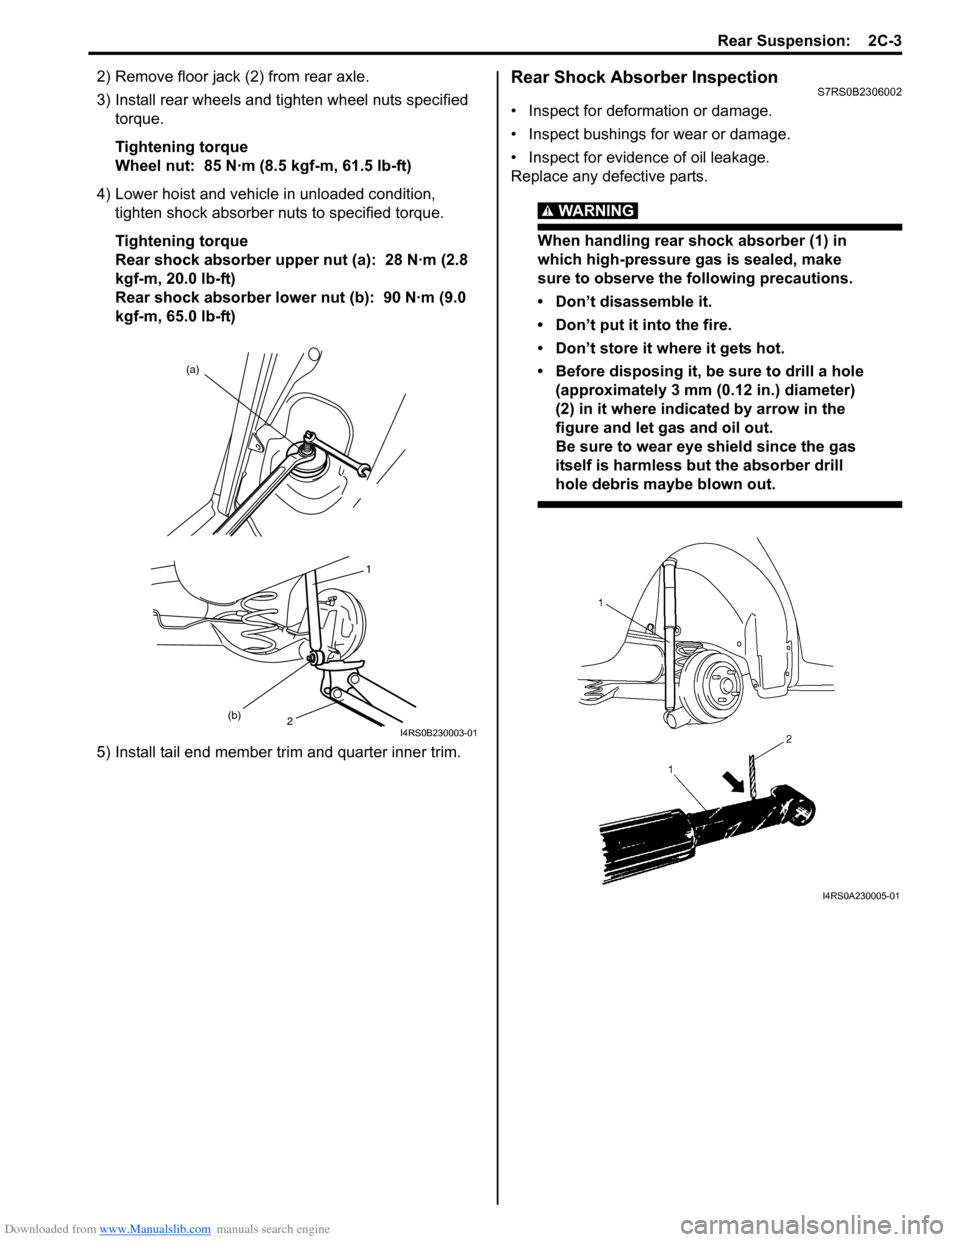 SUZUKI SWIFT 2008 2.G Service Workshop Manual Downloaded from www.Manualslib.com manuals search engine Rear Suspension:  2C-3
2) Remove floor jack (2) from rear axle.
3) Install rear wheels and tighten wheel nuts specified torque.
Tightening torq